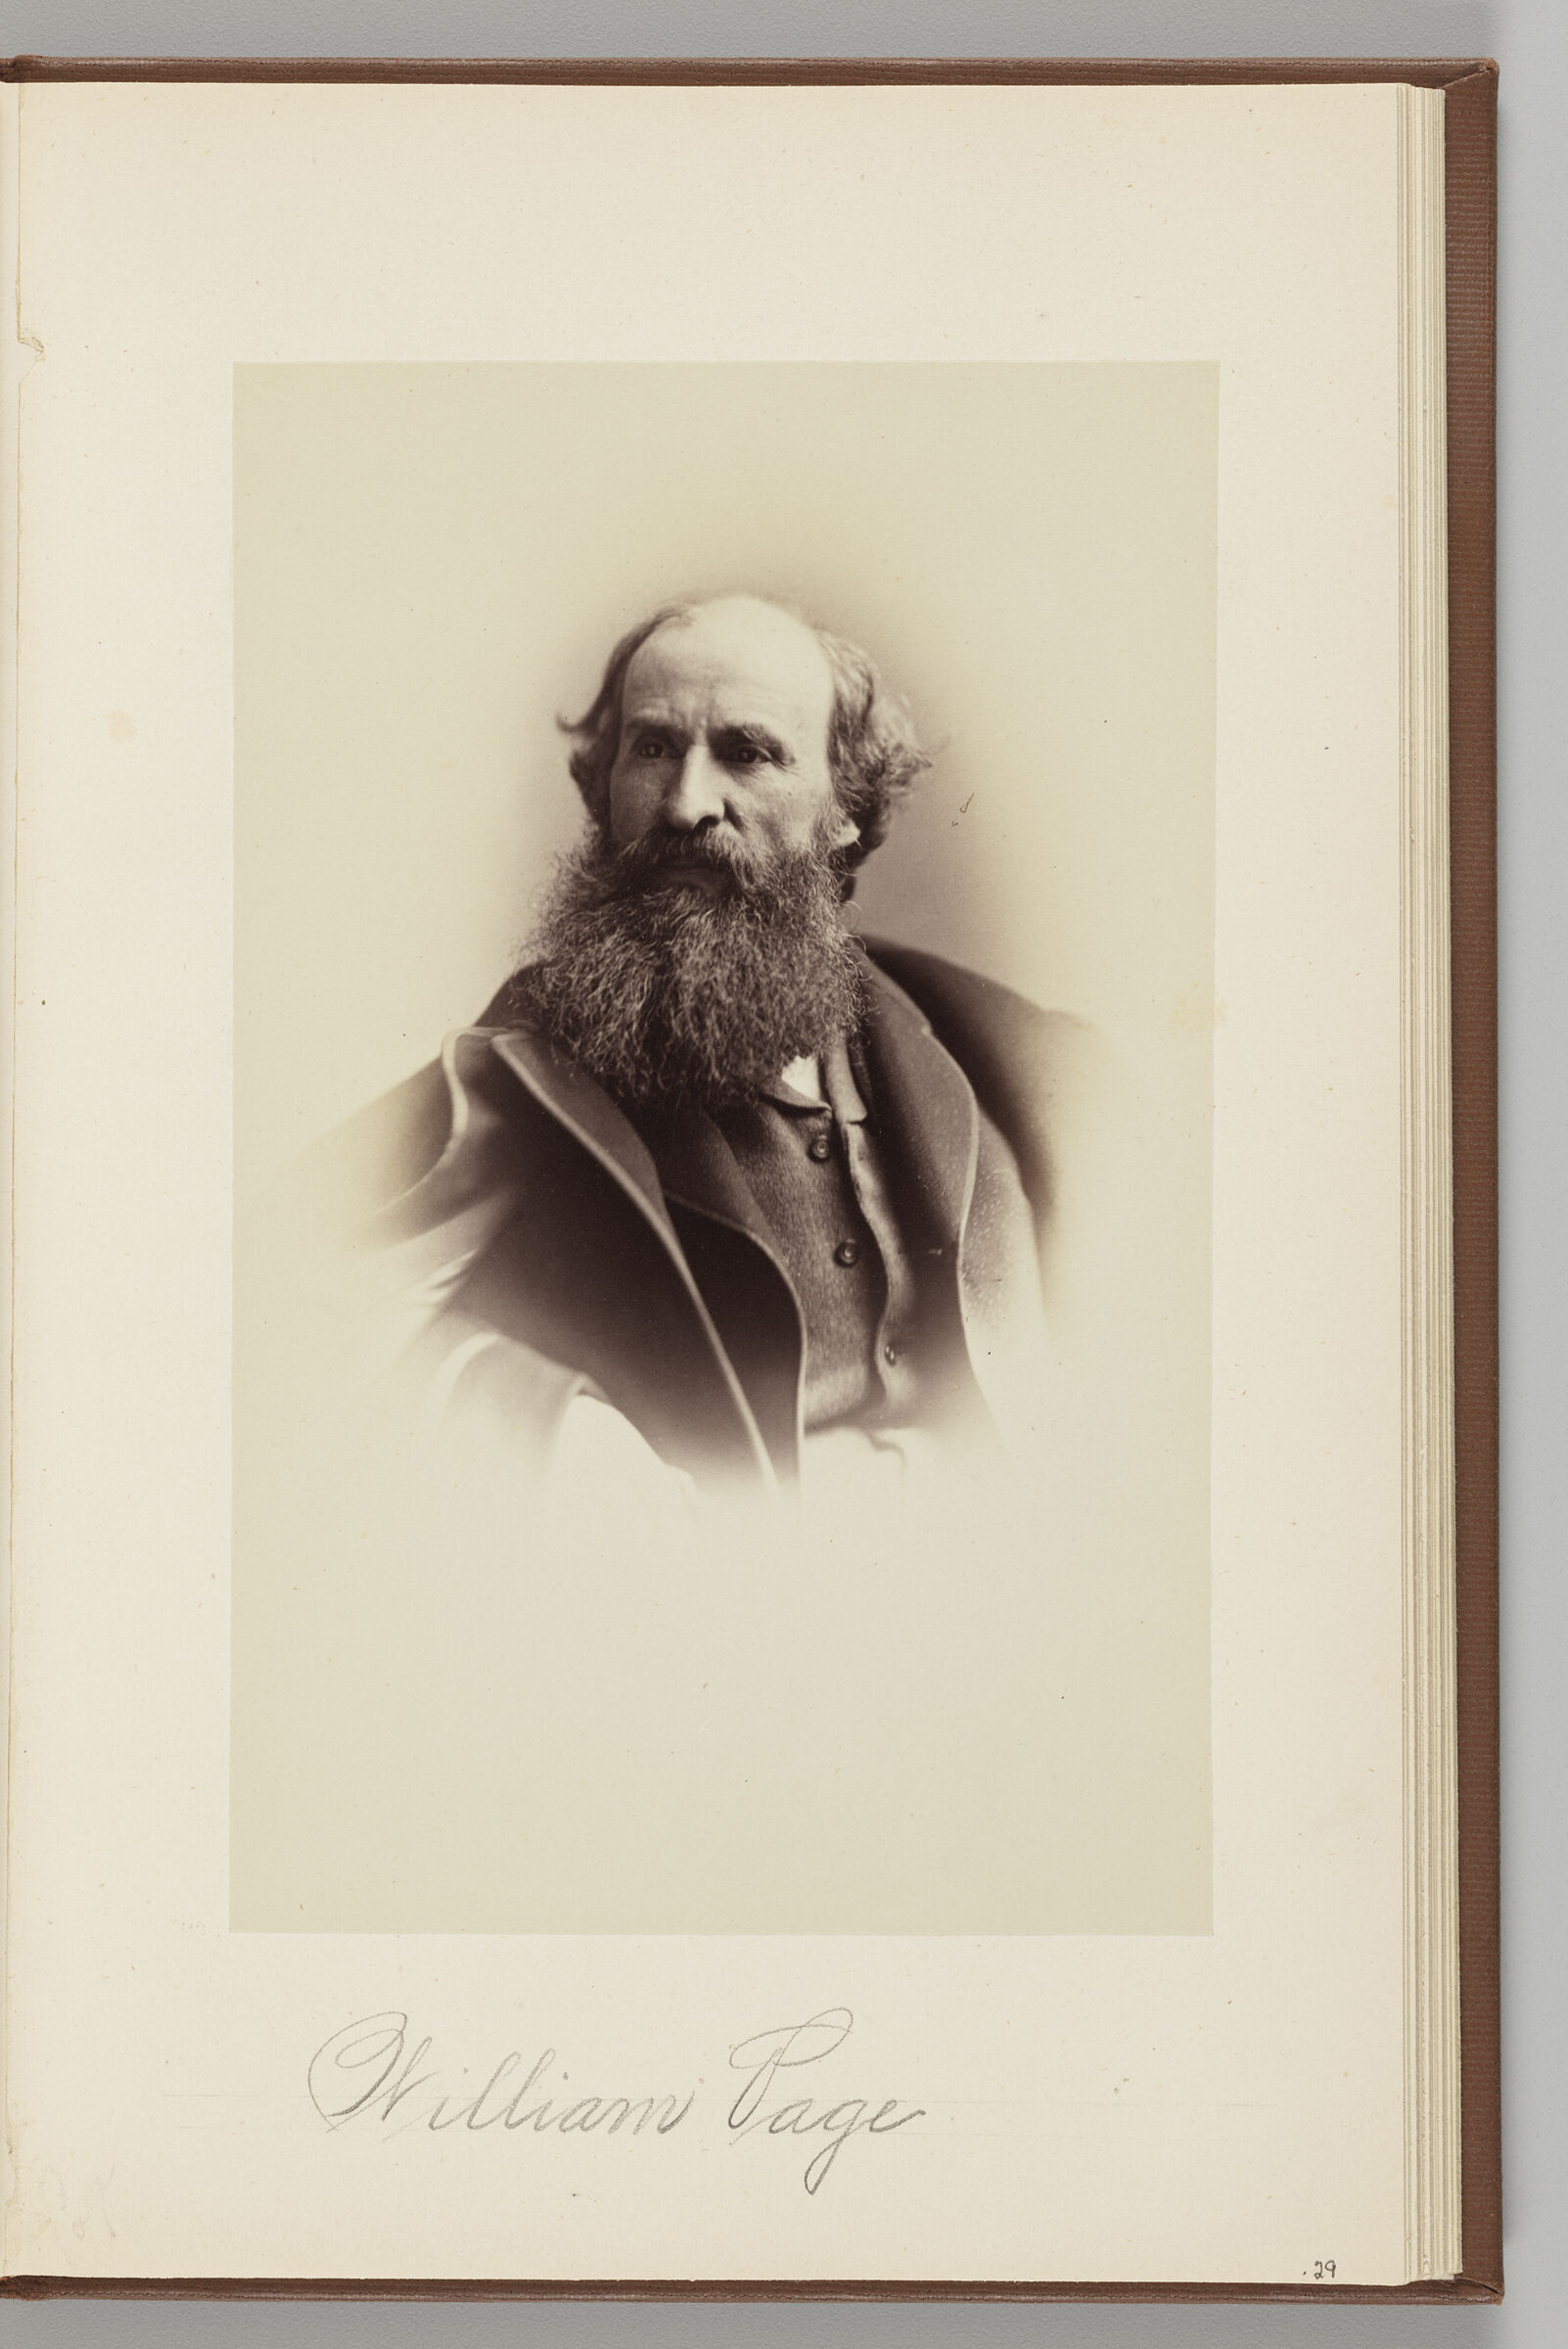 William Page (1811-1885)